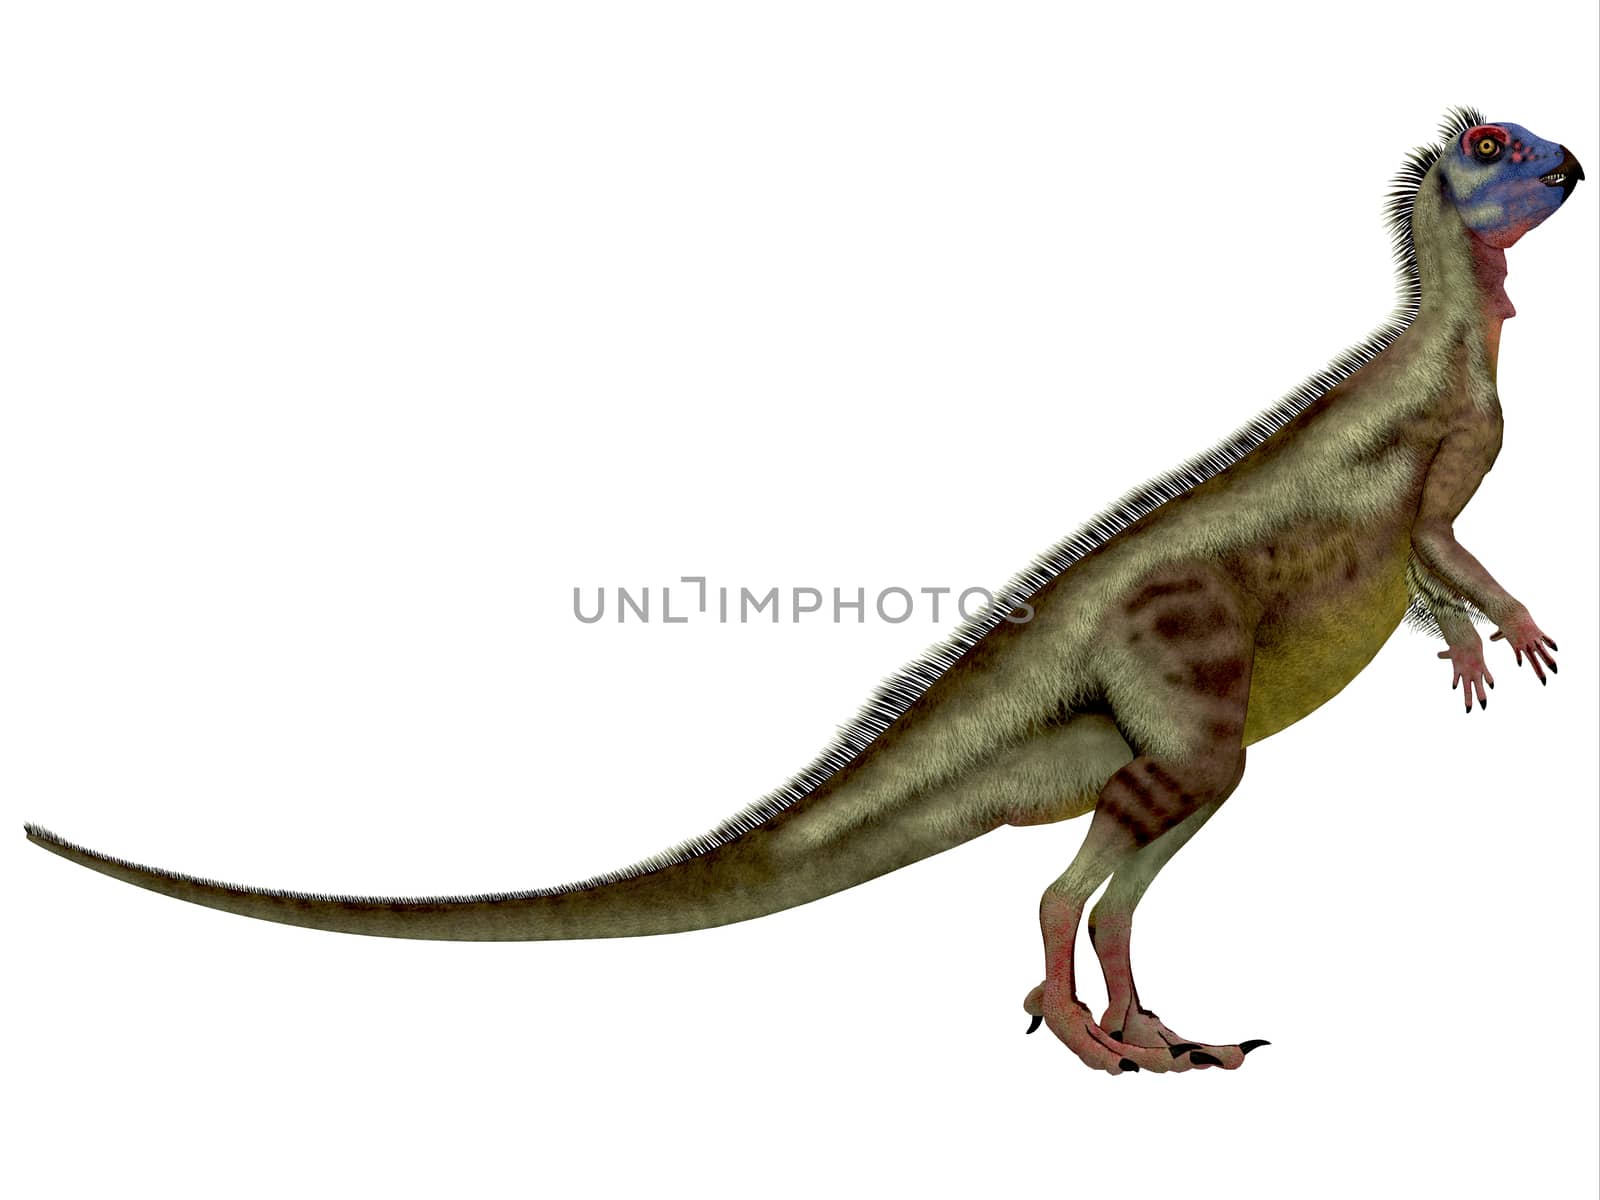 Hypsilophodon was an omnivorous dinosaur that lived in the Cretaceous Period of England.